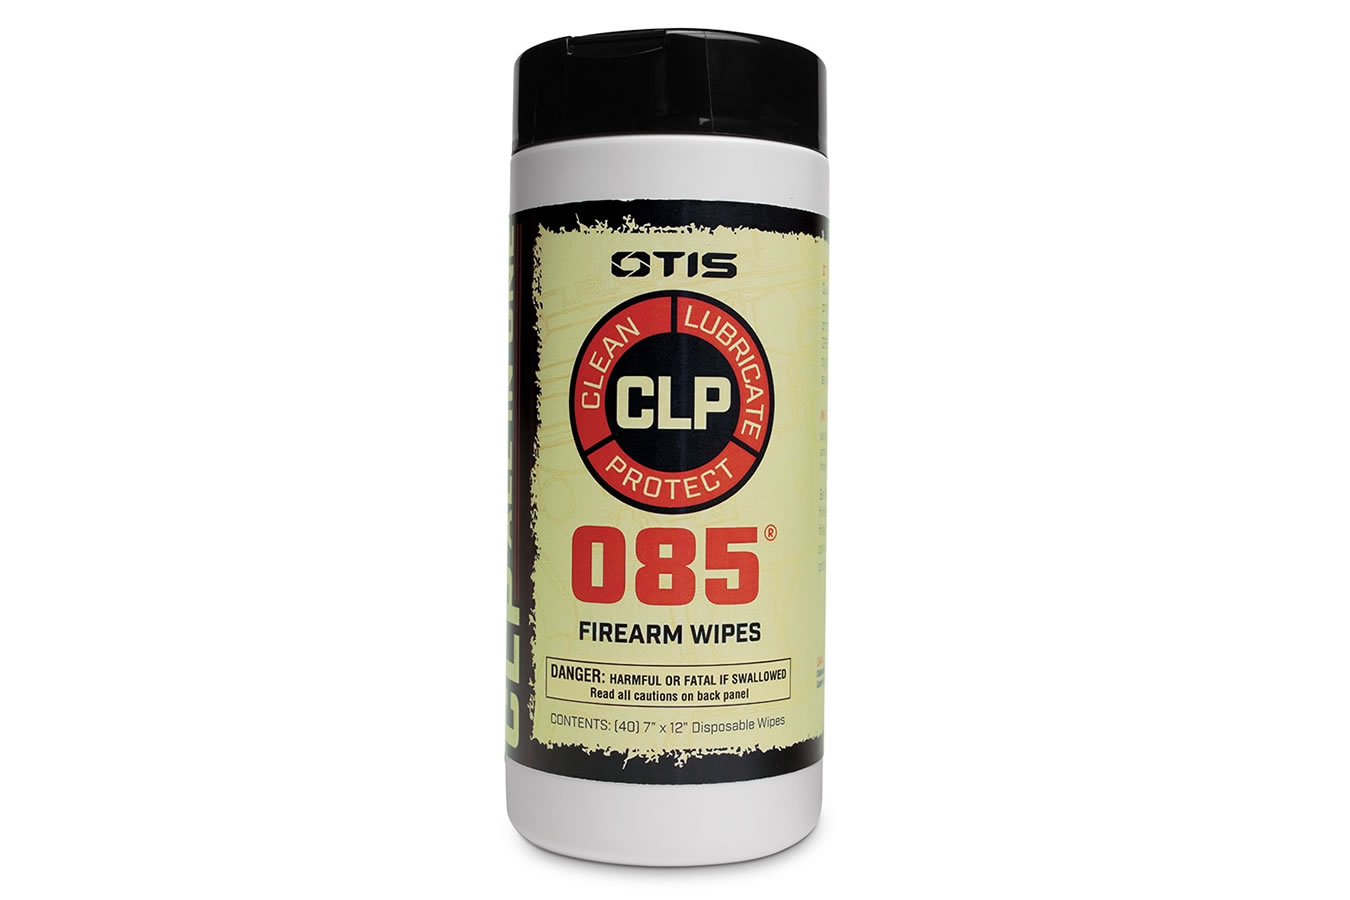 OTIS TECH O85 CLP WIPES CANISTER 40 COUNT